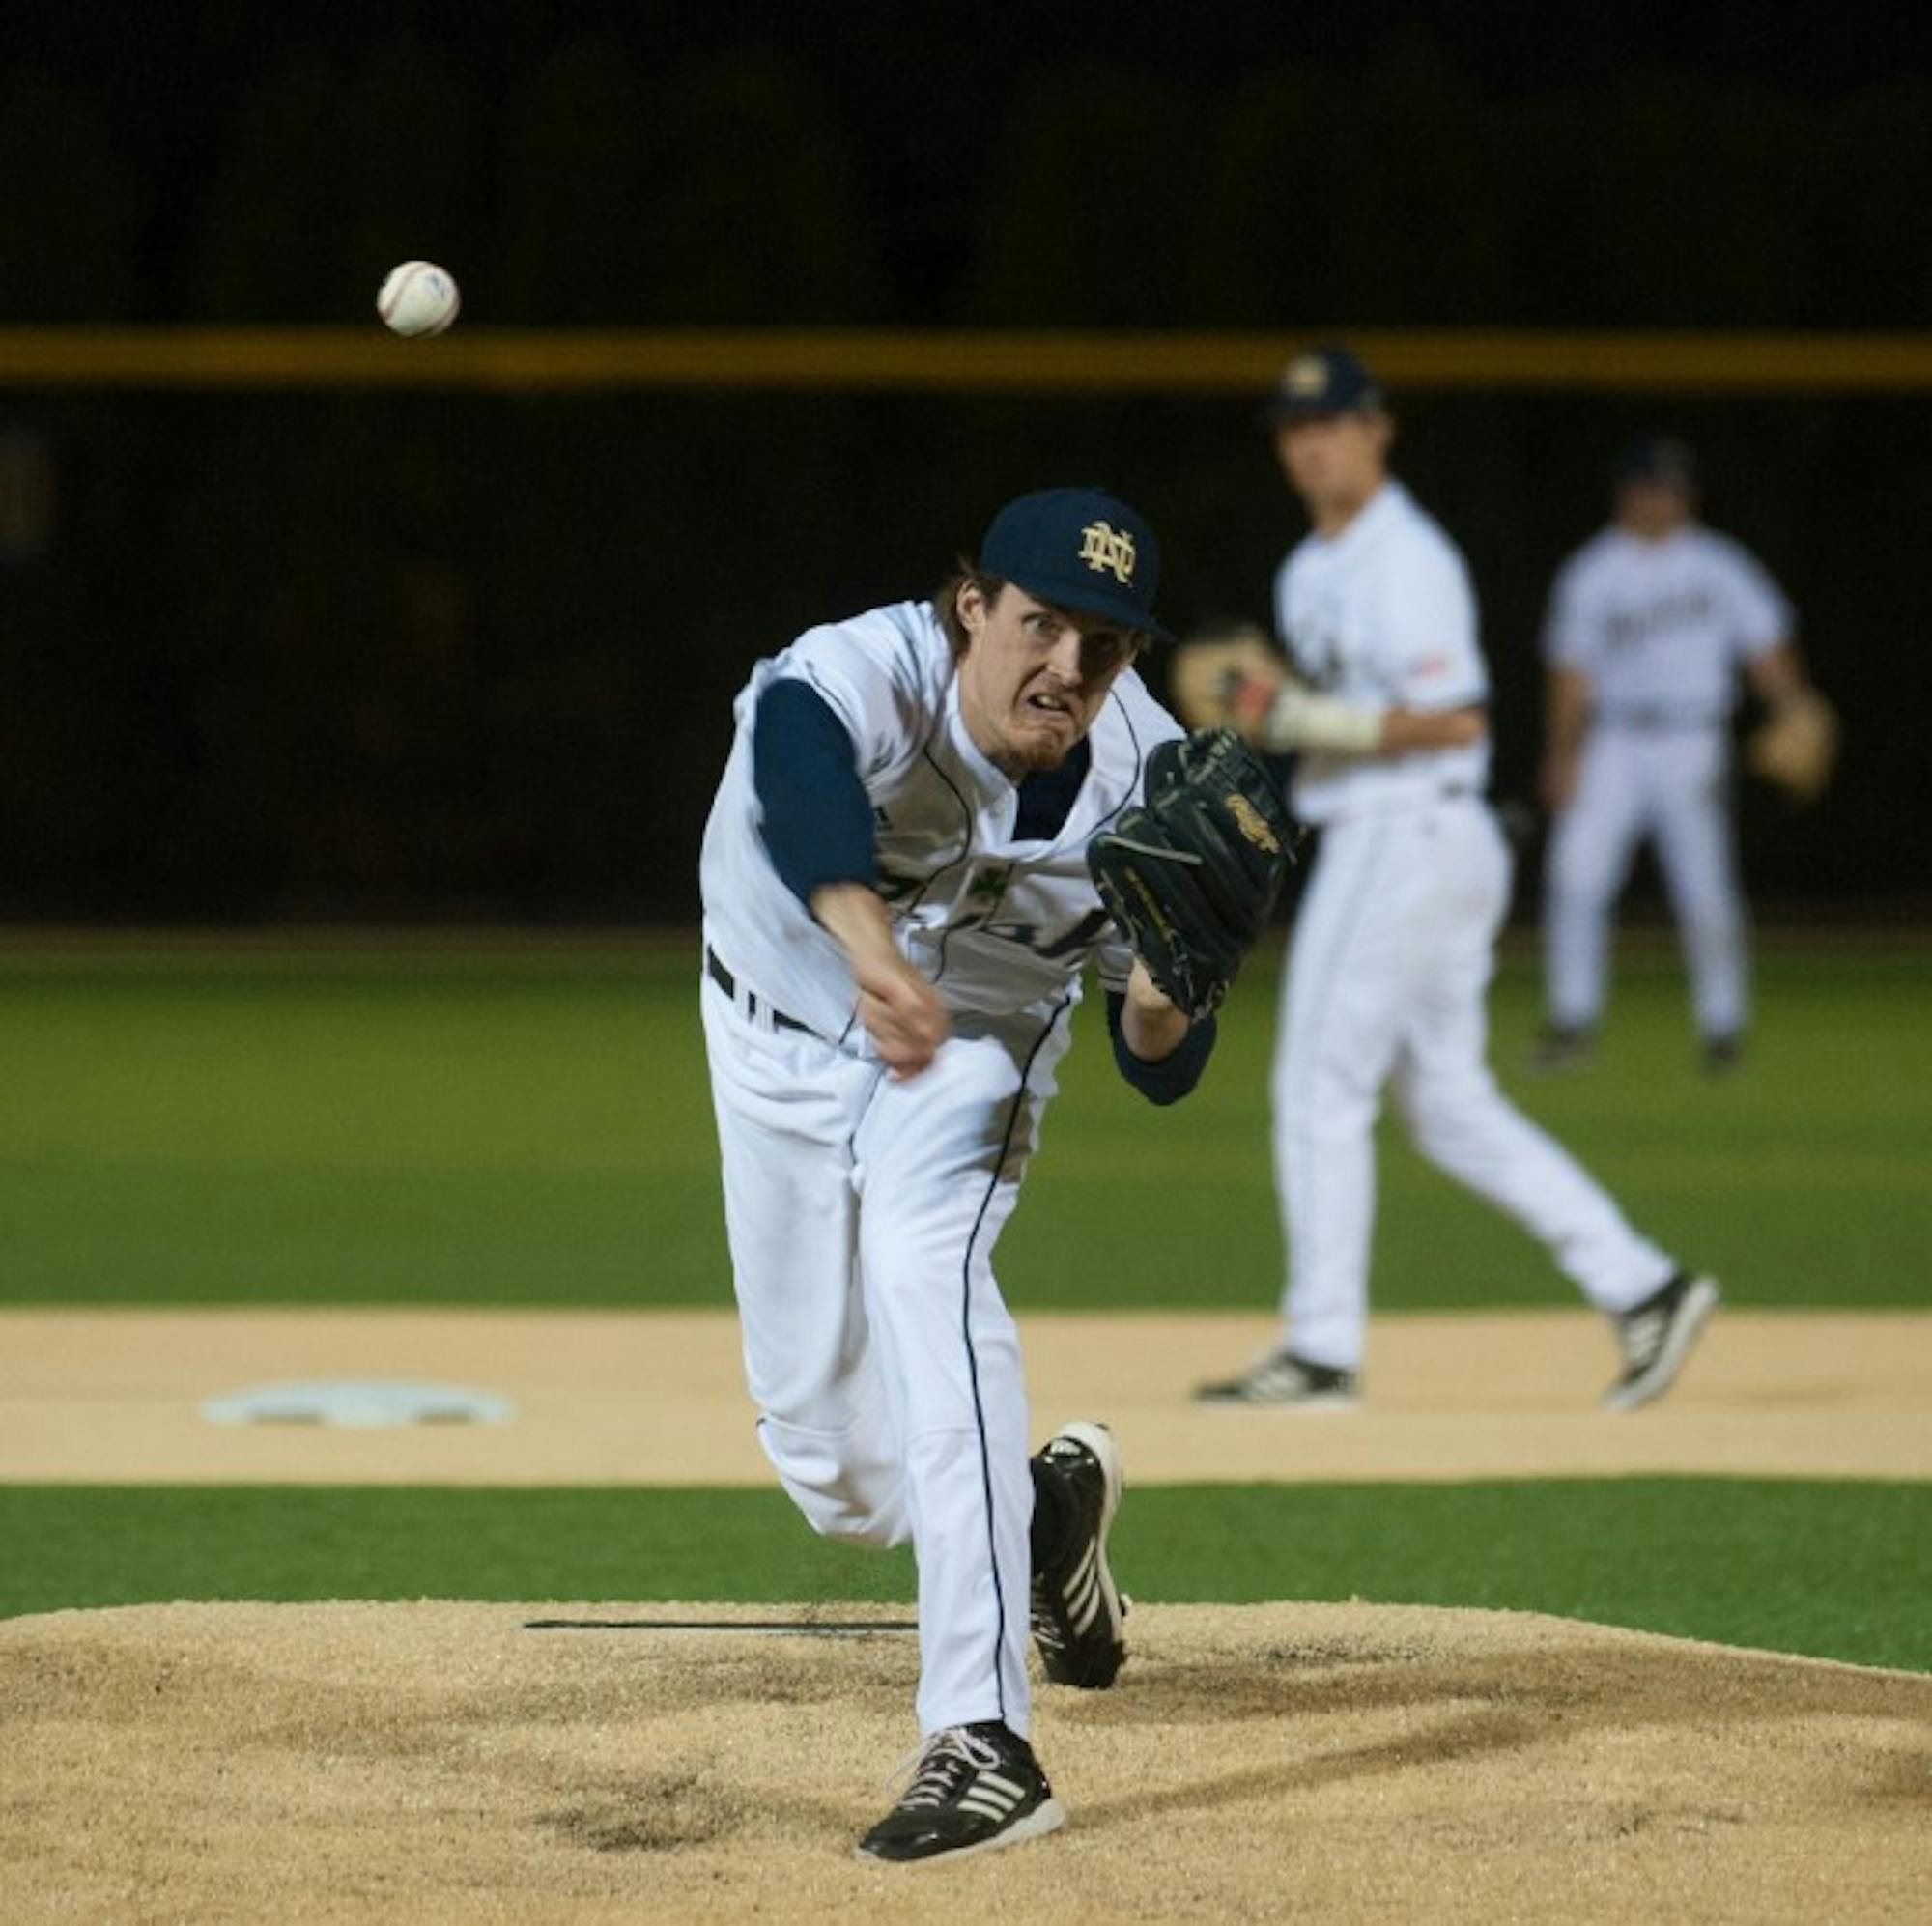 Irish senior Pat Connaughton delivers a pitch during a win 2-1 win over Clemson on May 9, 2014. He went eight innings giving up one run on three hits.